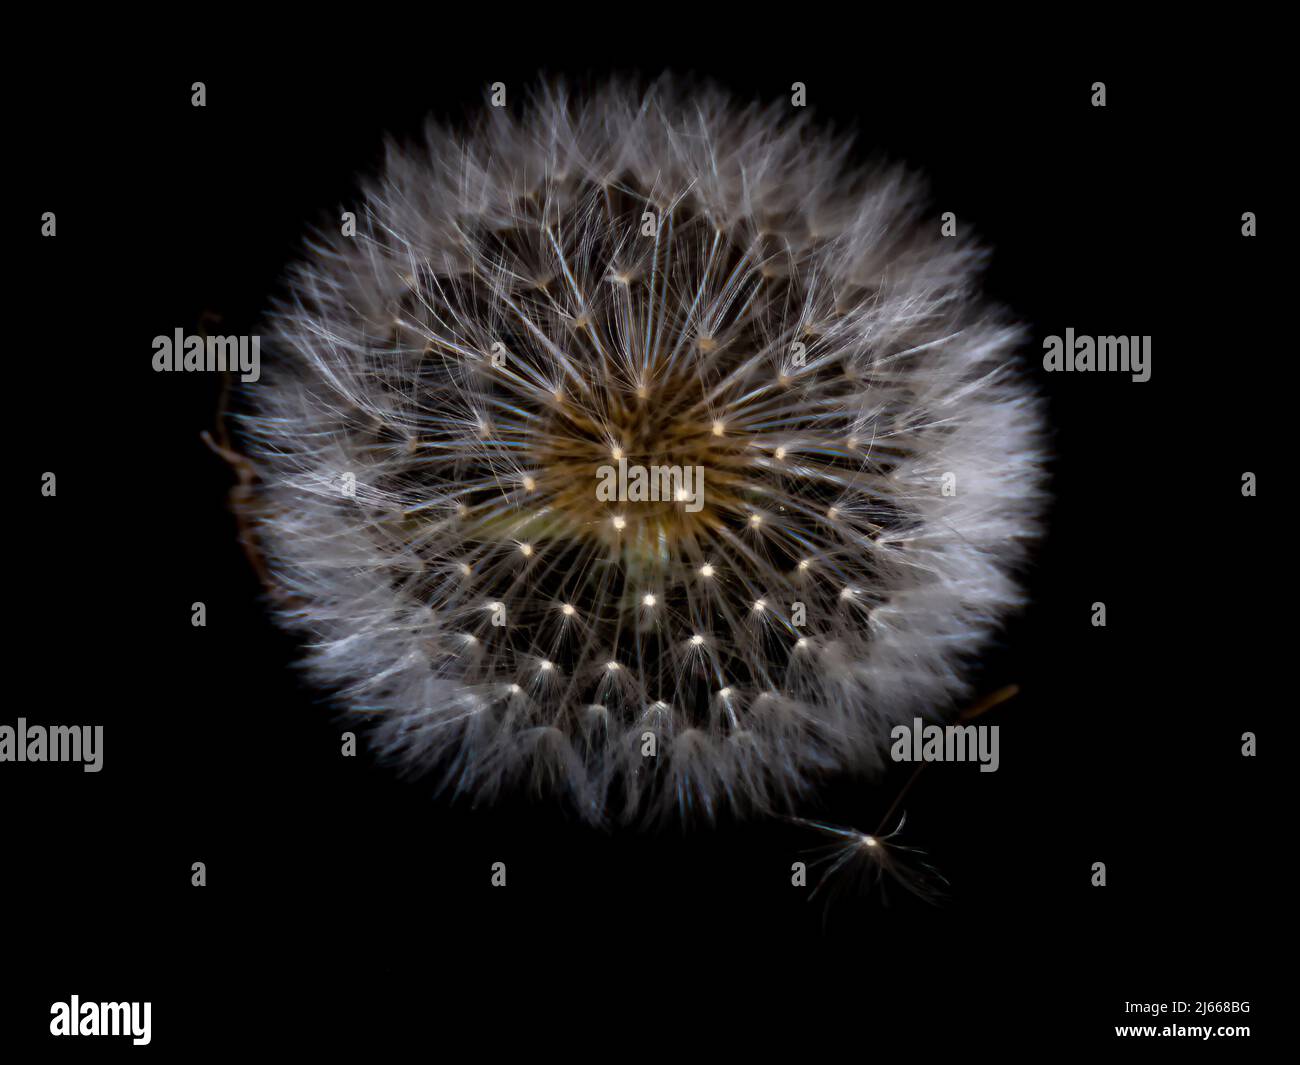 Close-up shot of a dandelion with seeds ready to fly carried by the wind on a black background Stock Photo